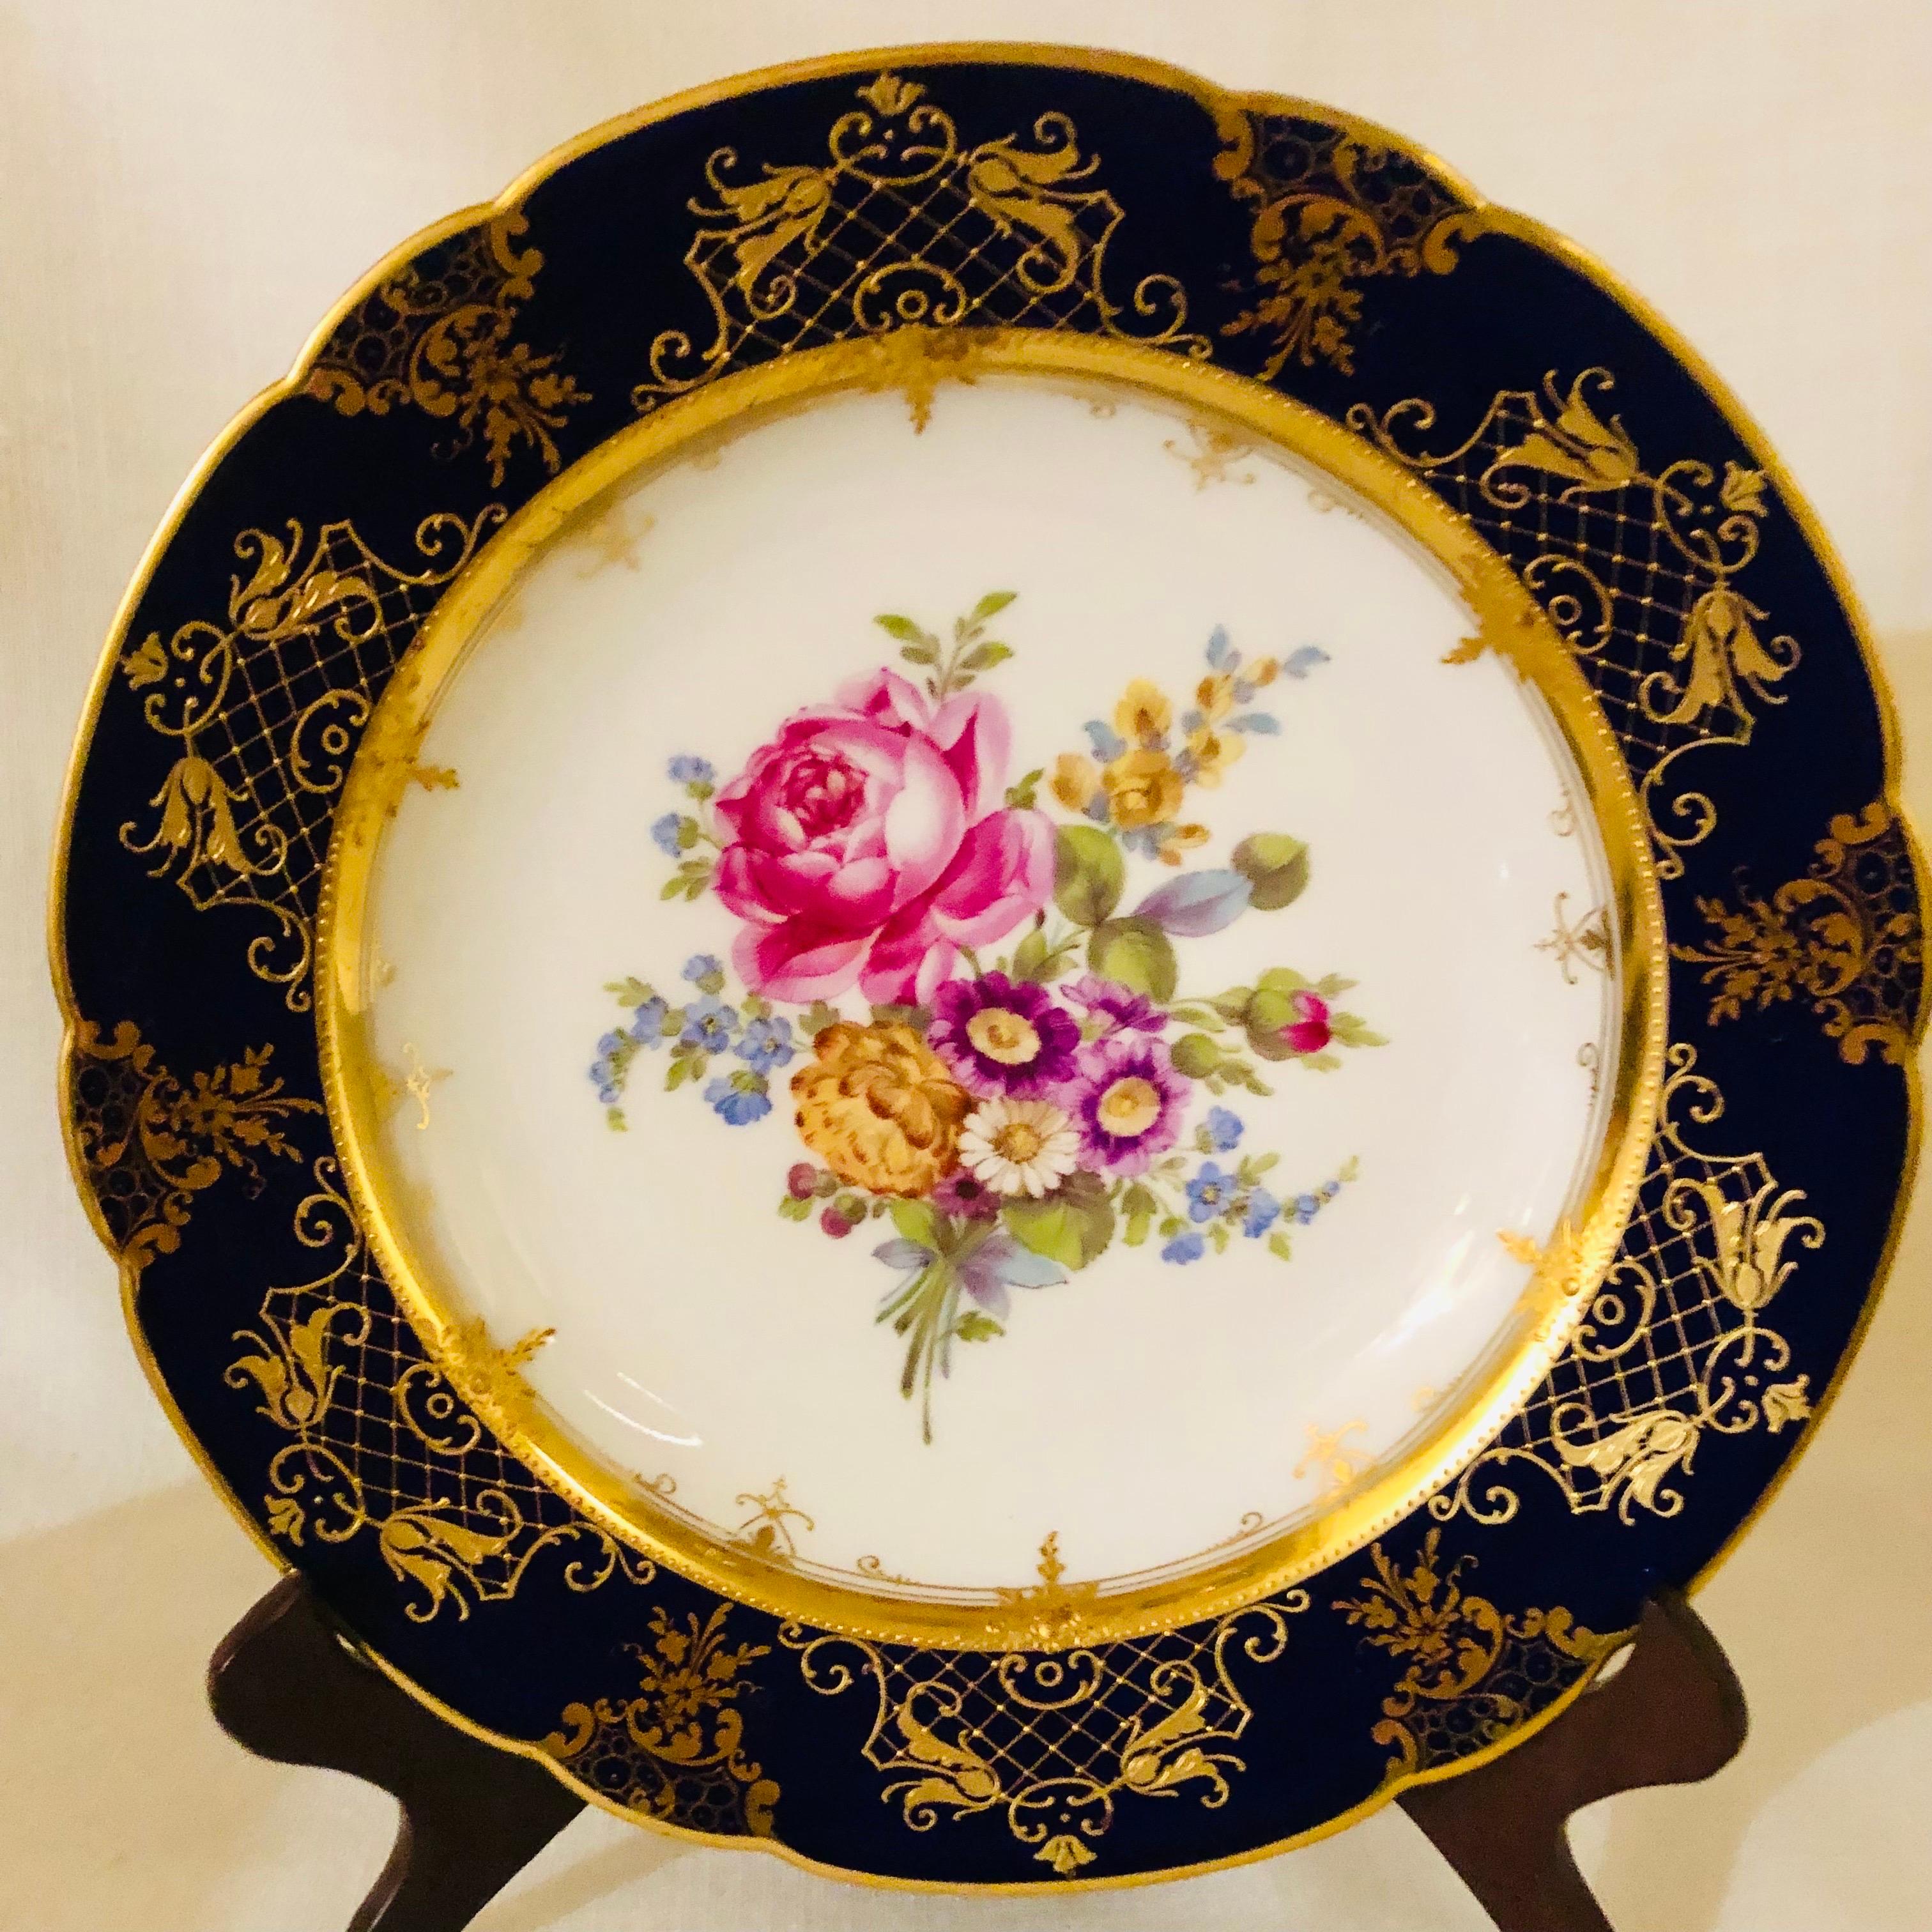 These are a set of ten exquisite Ambrosius Lamm Dresden dinner plates. These exemplify the fabulous talent of the artists of the Ambrosius Lamm Dresden decorators over a hundred years ago. Each dinner plate has a different large majestic bouquet of